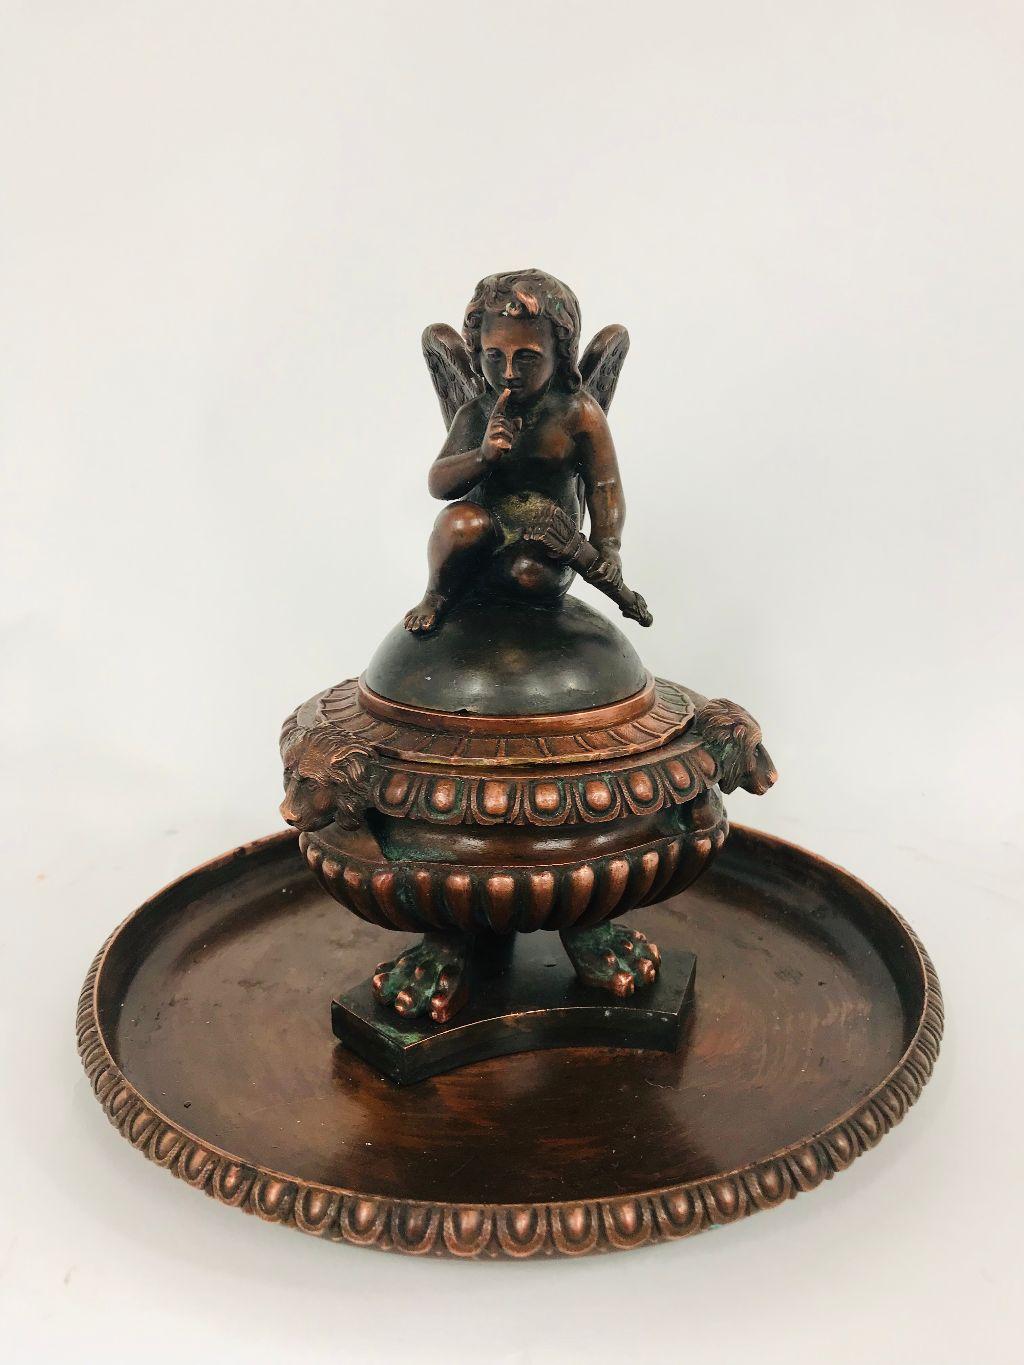 Superb late 19th century handmade heavy figural bronze humidor adorned with a finely done mischievous cupid. Particularly well crafted in heavy natural bronze, not patinated. Can not claim a country of origin however bronze work of this quality was